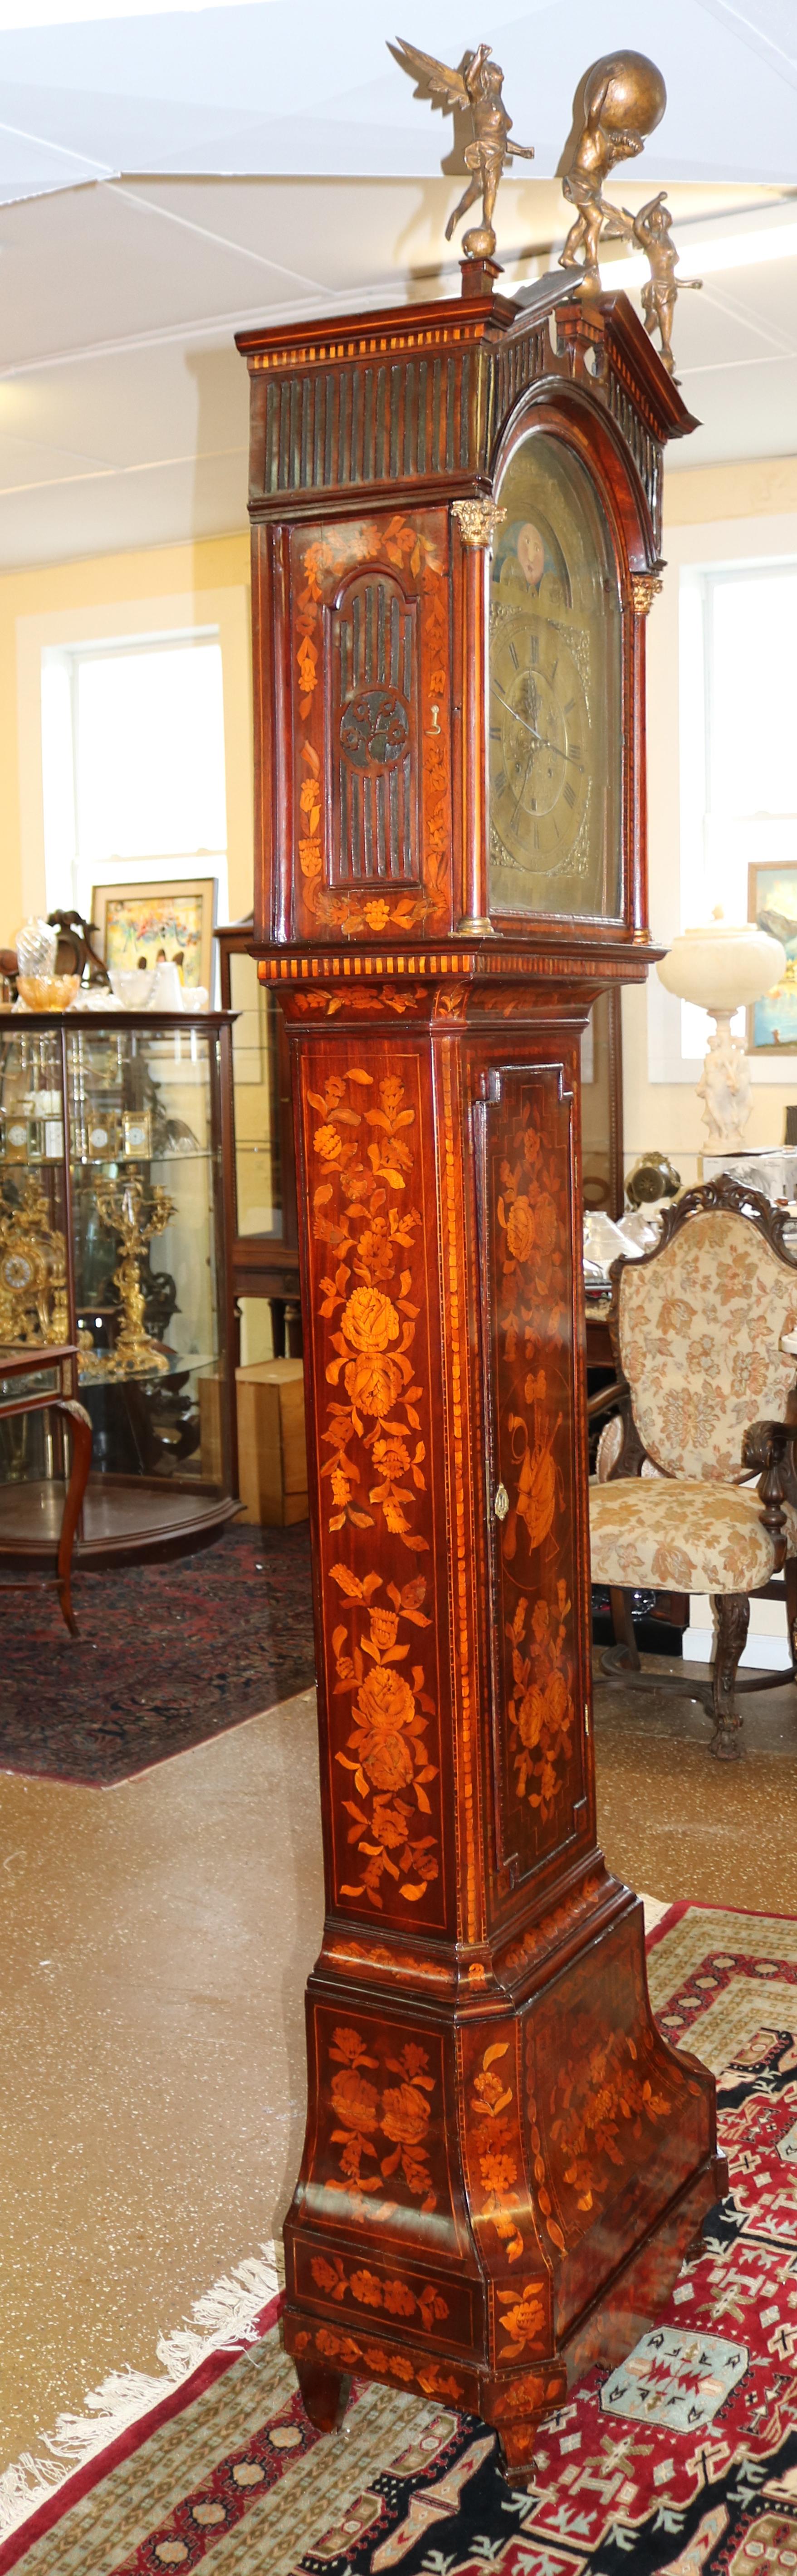 Late 18th Century Figural Dutch Marquetry Tall Case Grandfather Clock  For Sale 4